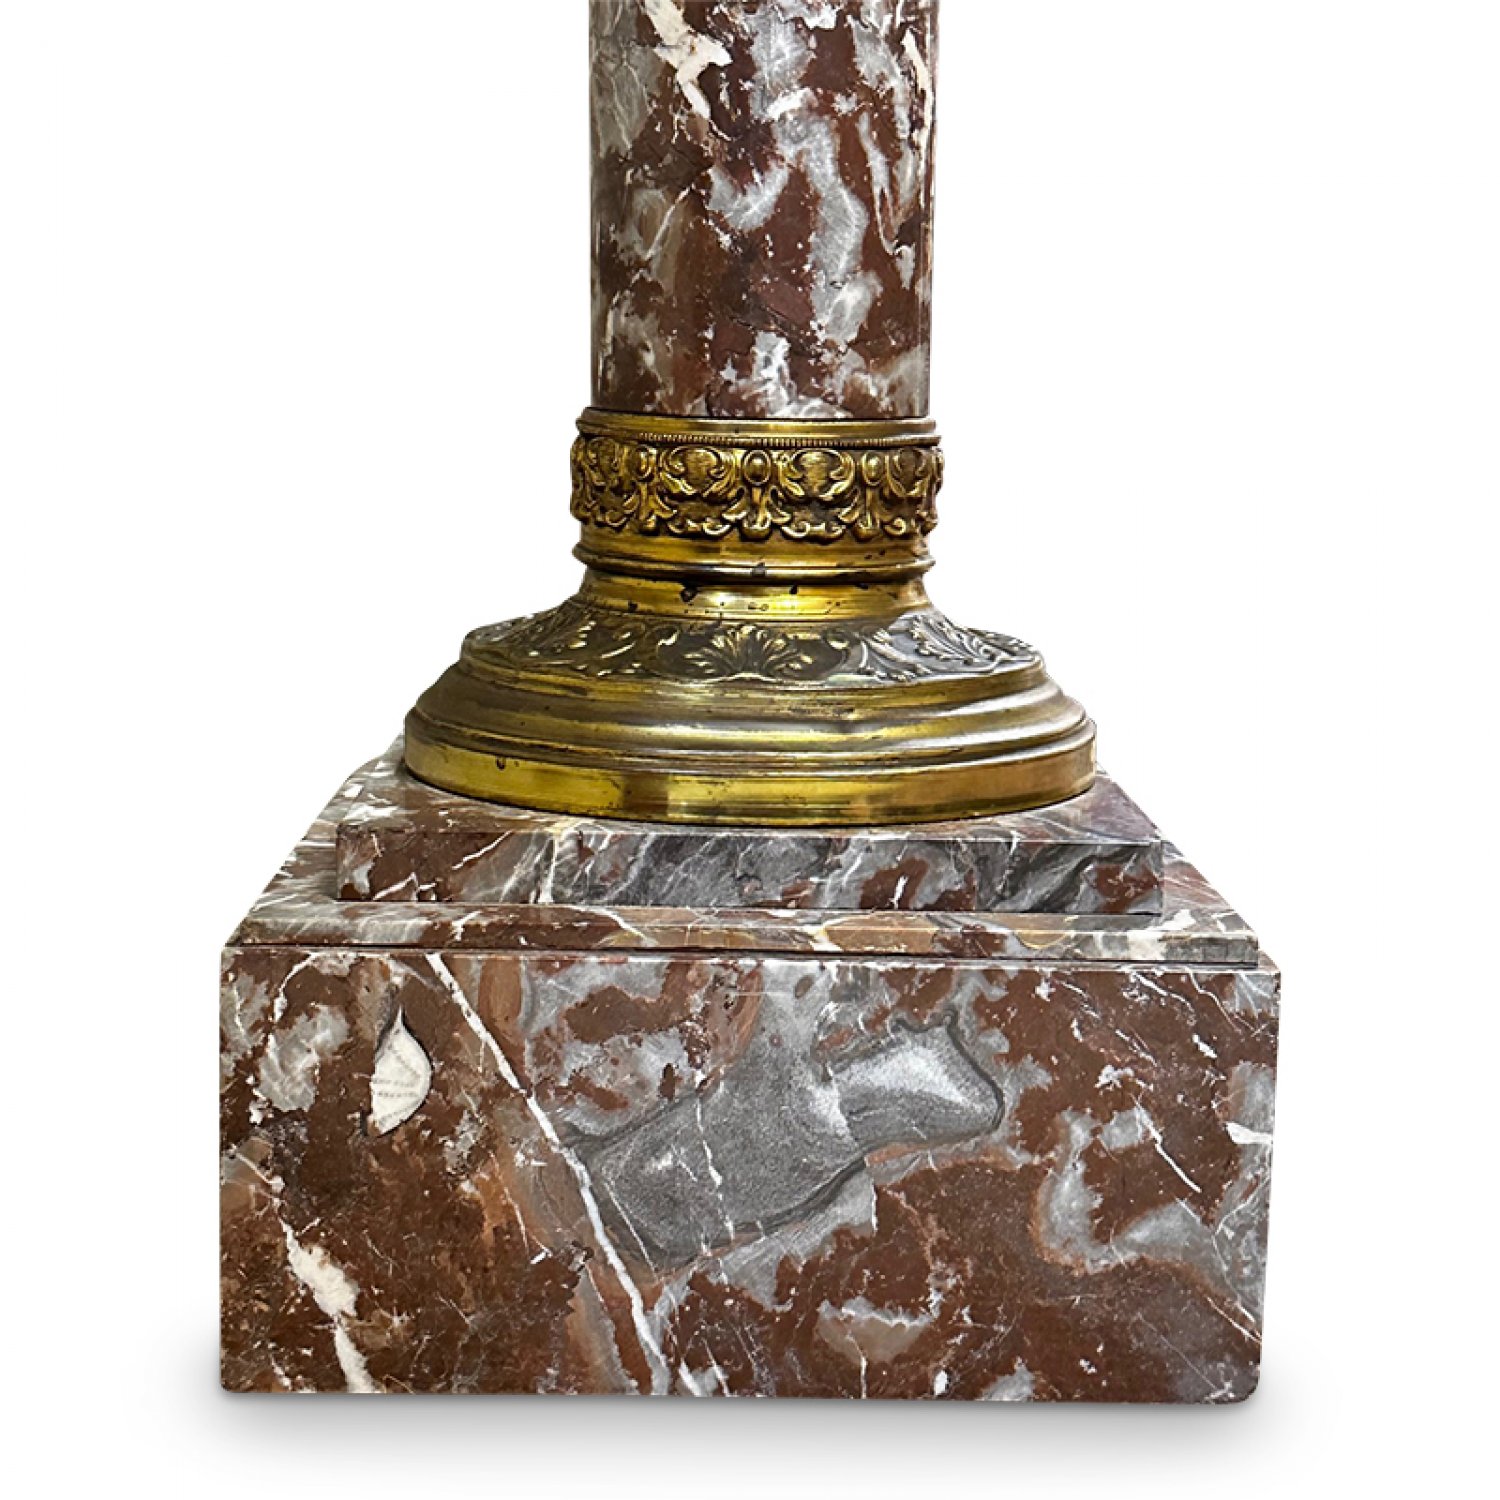 French marble pedestal with ormolu mounts